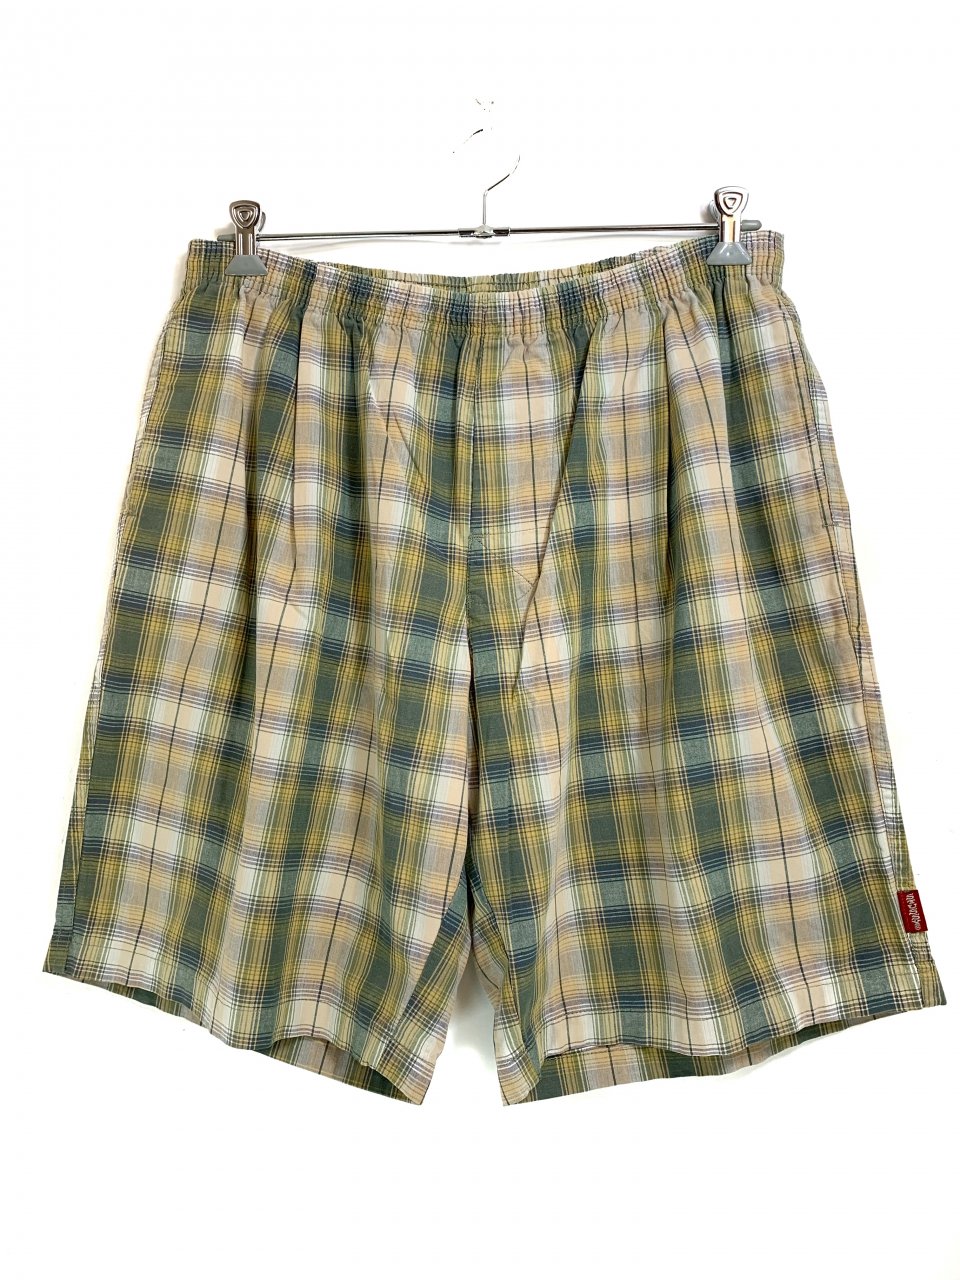 USA製 90s OLD STUSSY Check Cotton Easy Shorts 茶緑 L オールド